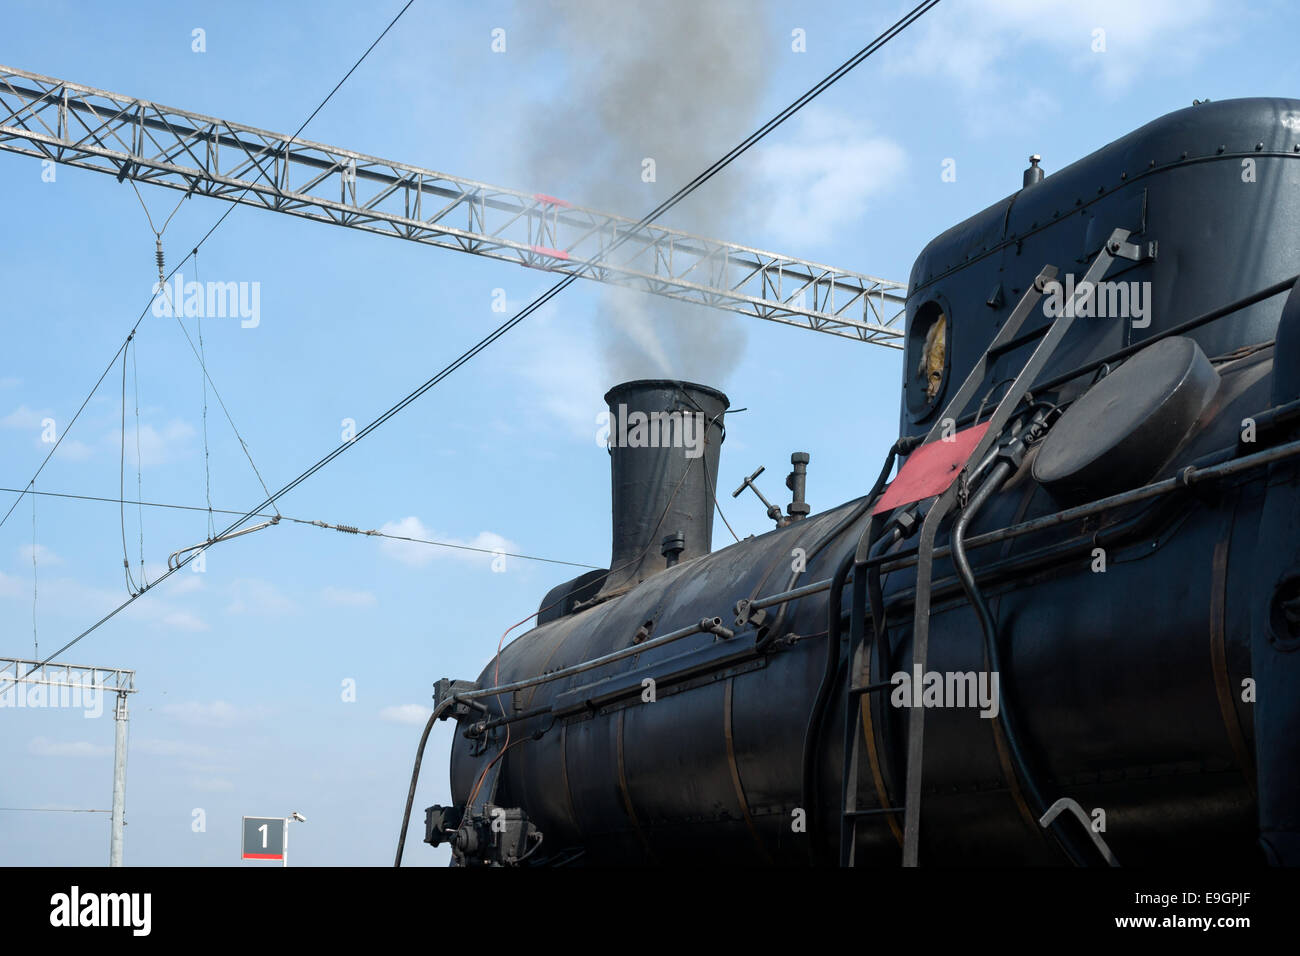 Steam locomotive in steam and ready to depart. Partial view of black boiler and chimney. Smoke comes out of a chimney Stock Photo